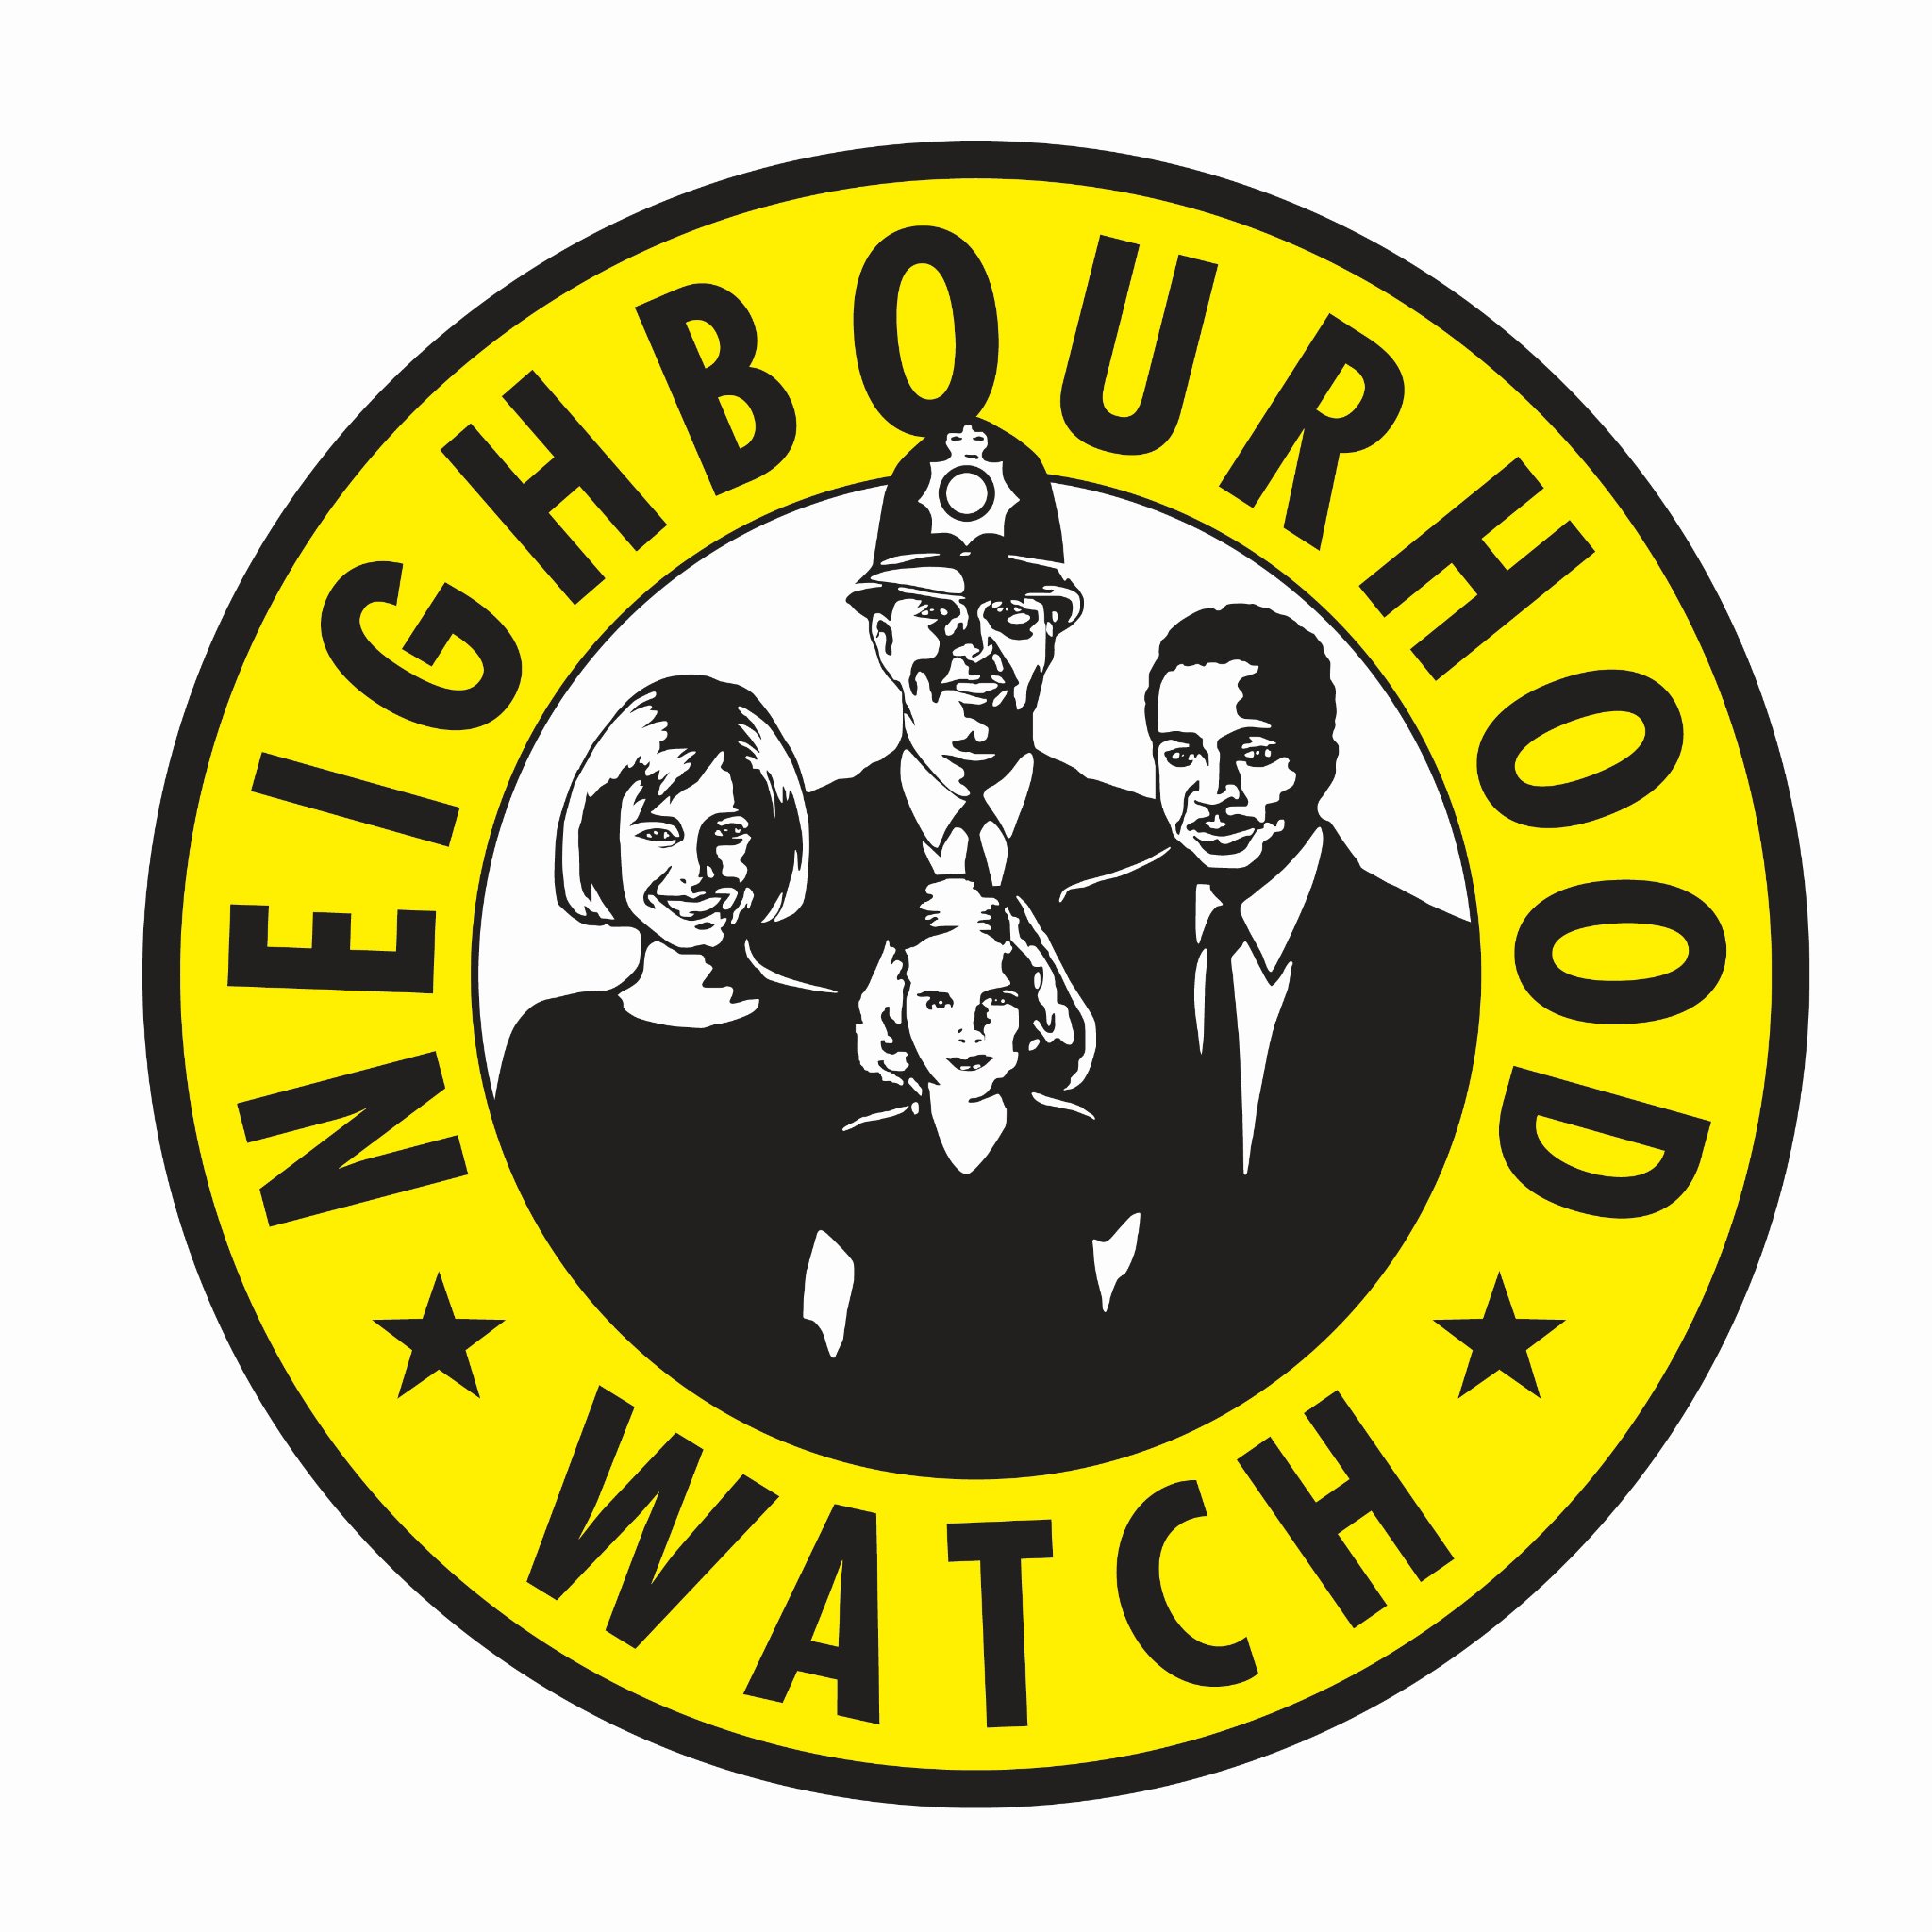 Neighbourhood Watch is there to help our communities look out for each other and increase awareness. This page is not for reporting crimes 🧐